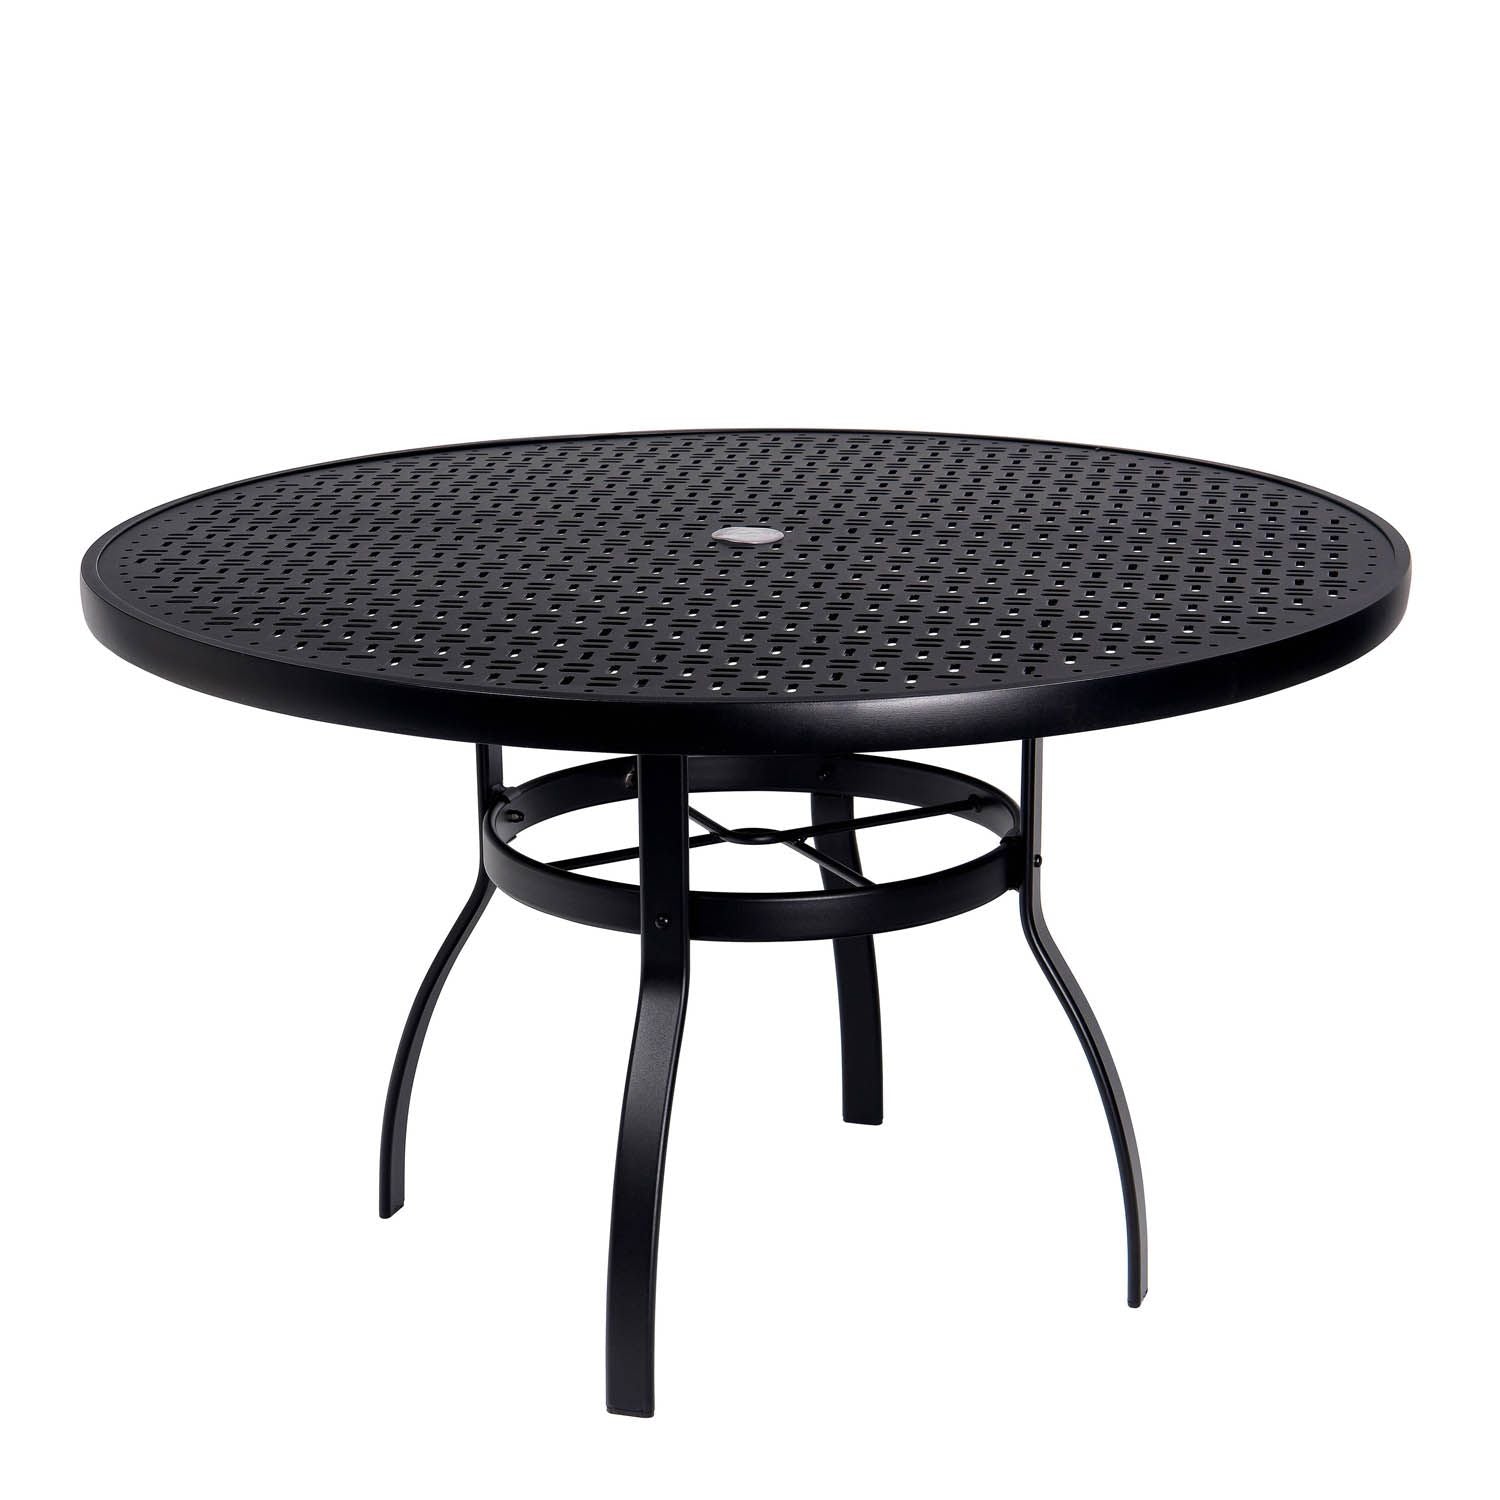 Woodard Deluxe Complete 48in Round Dining Table with Lattice Top in Twilight Finish 12038981